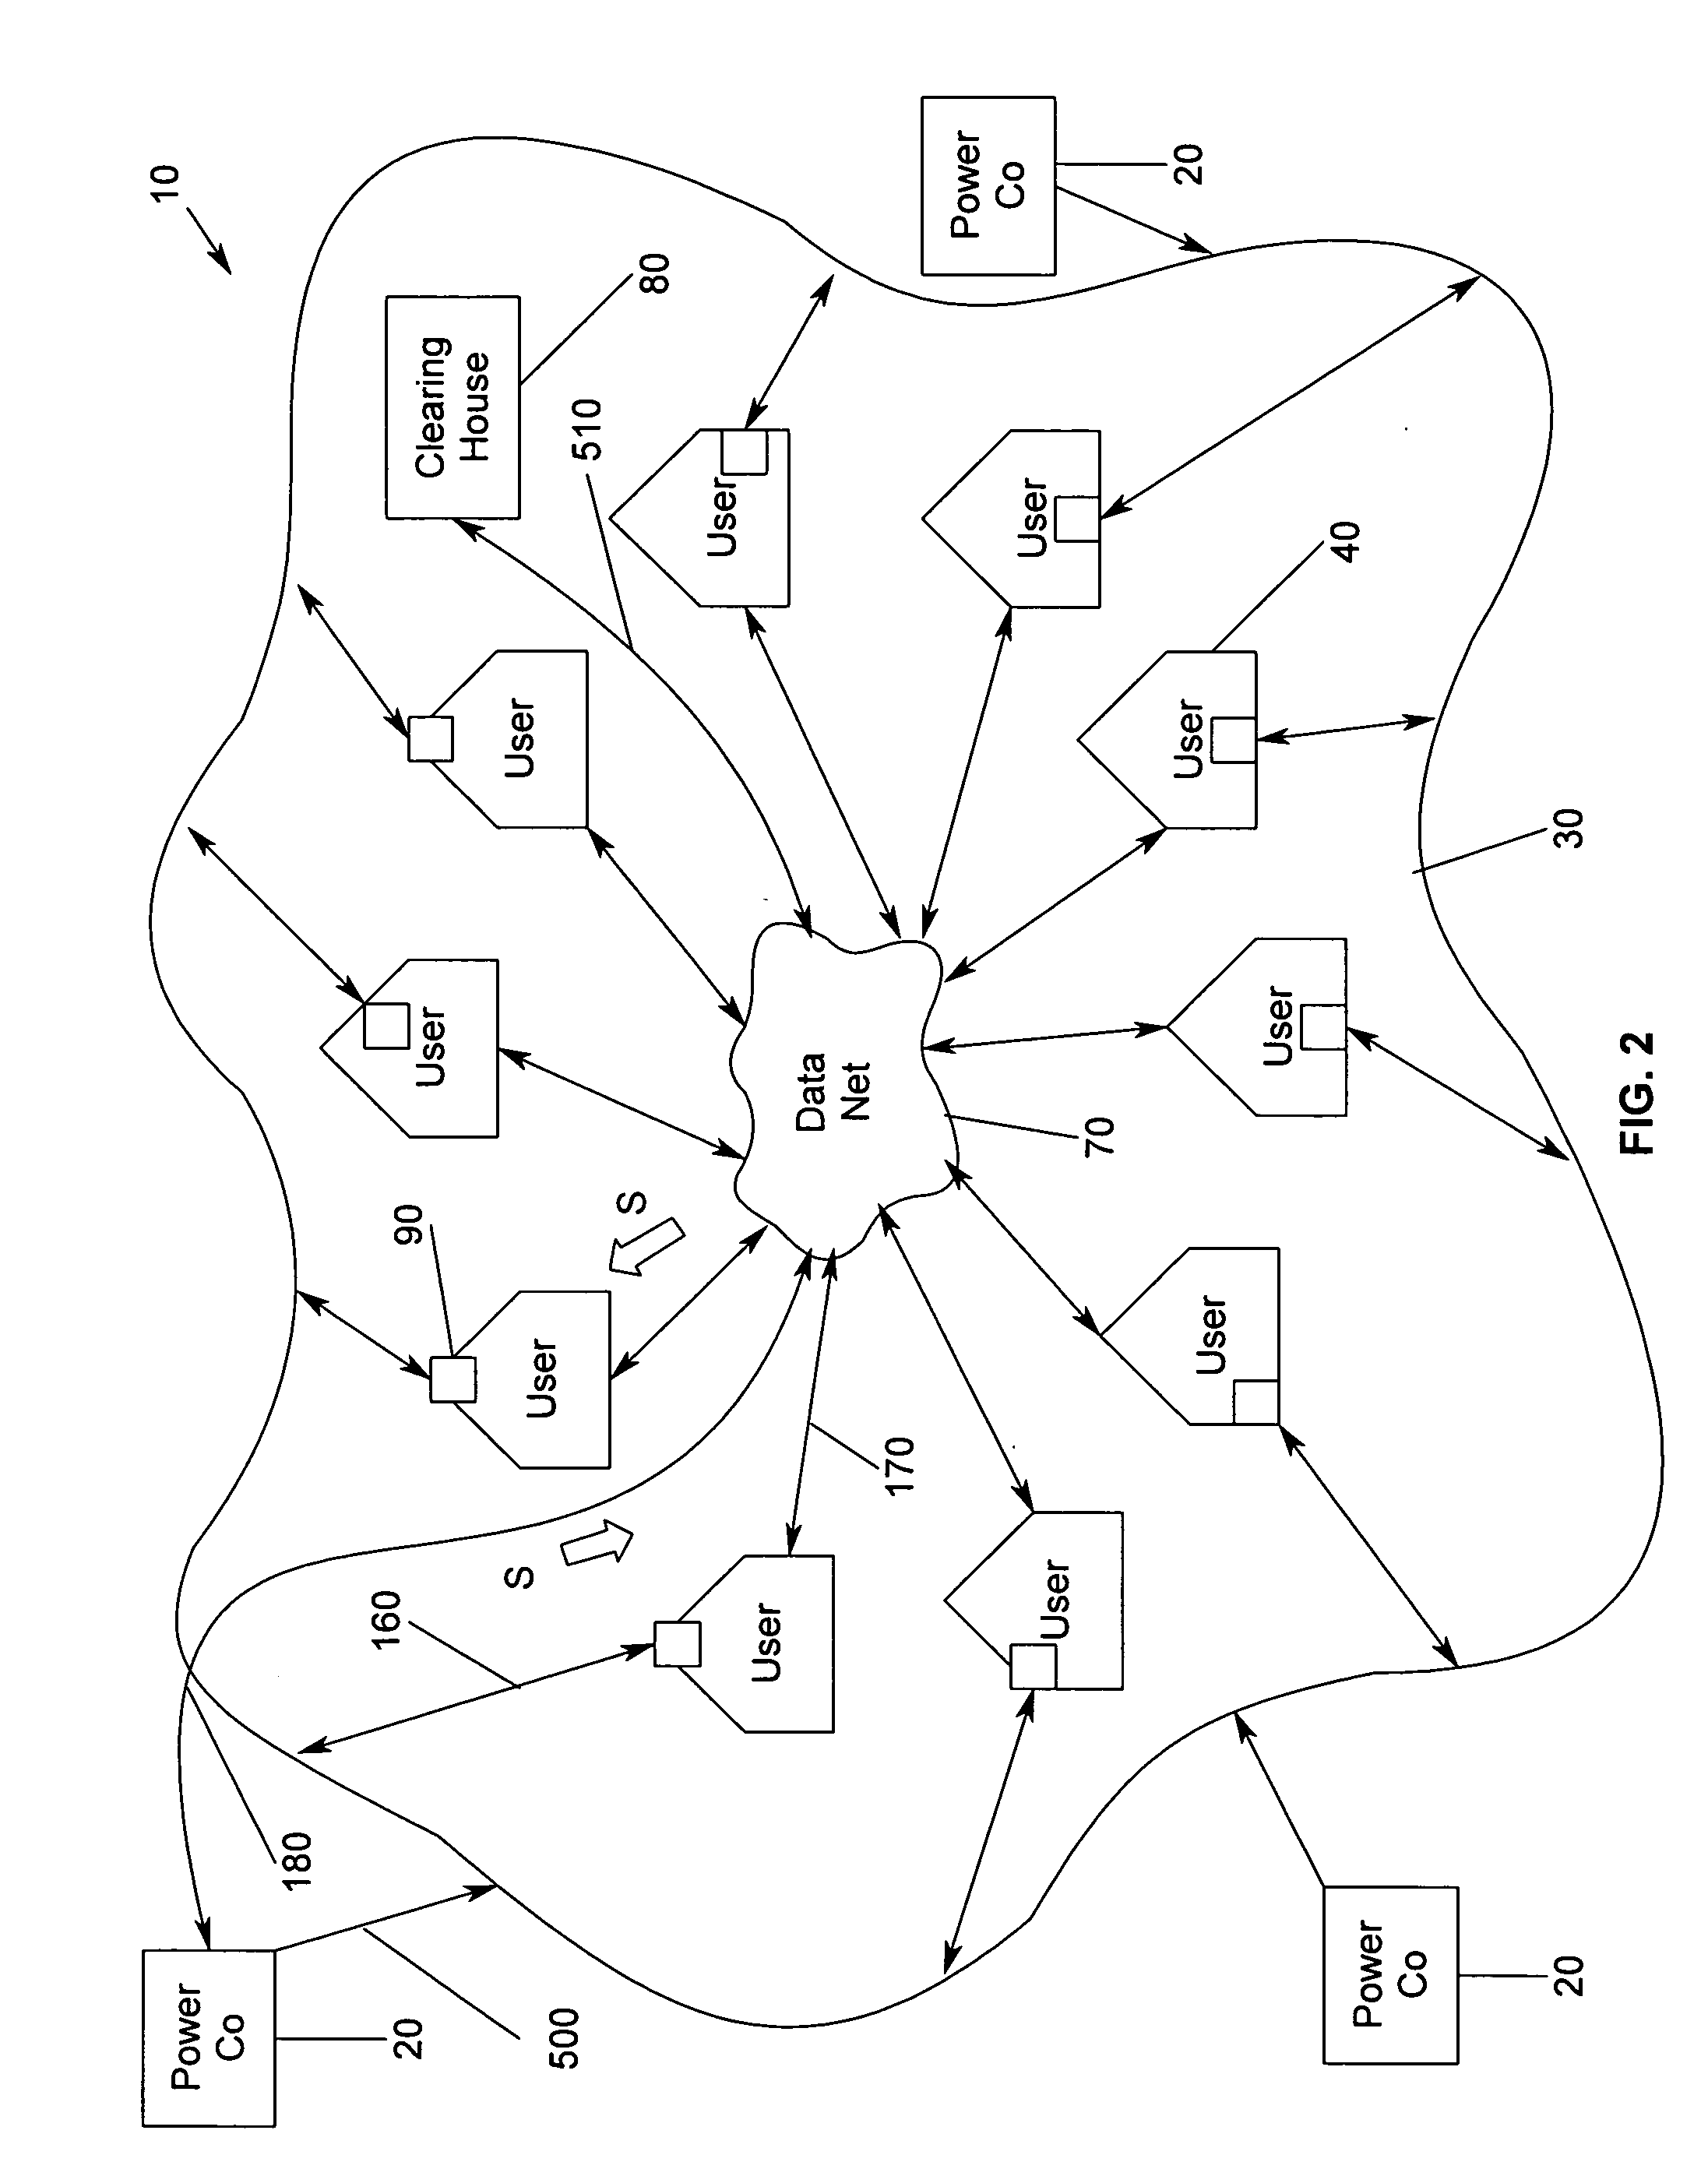 Electric power shuttling and management system, and method